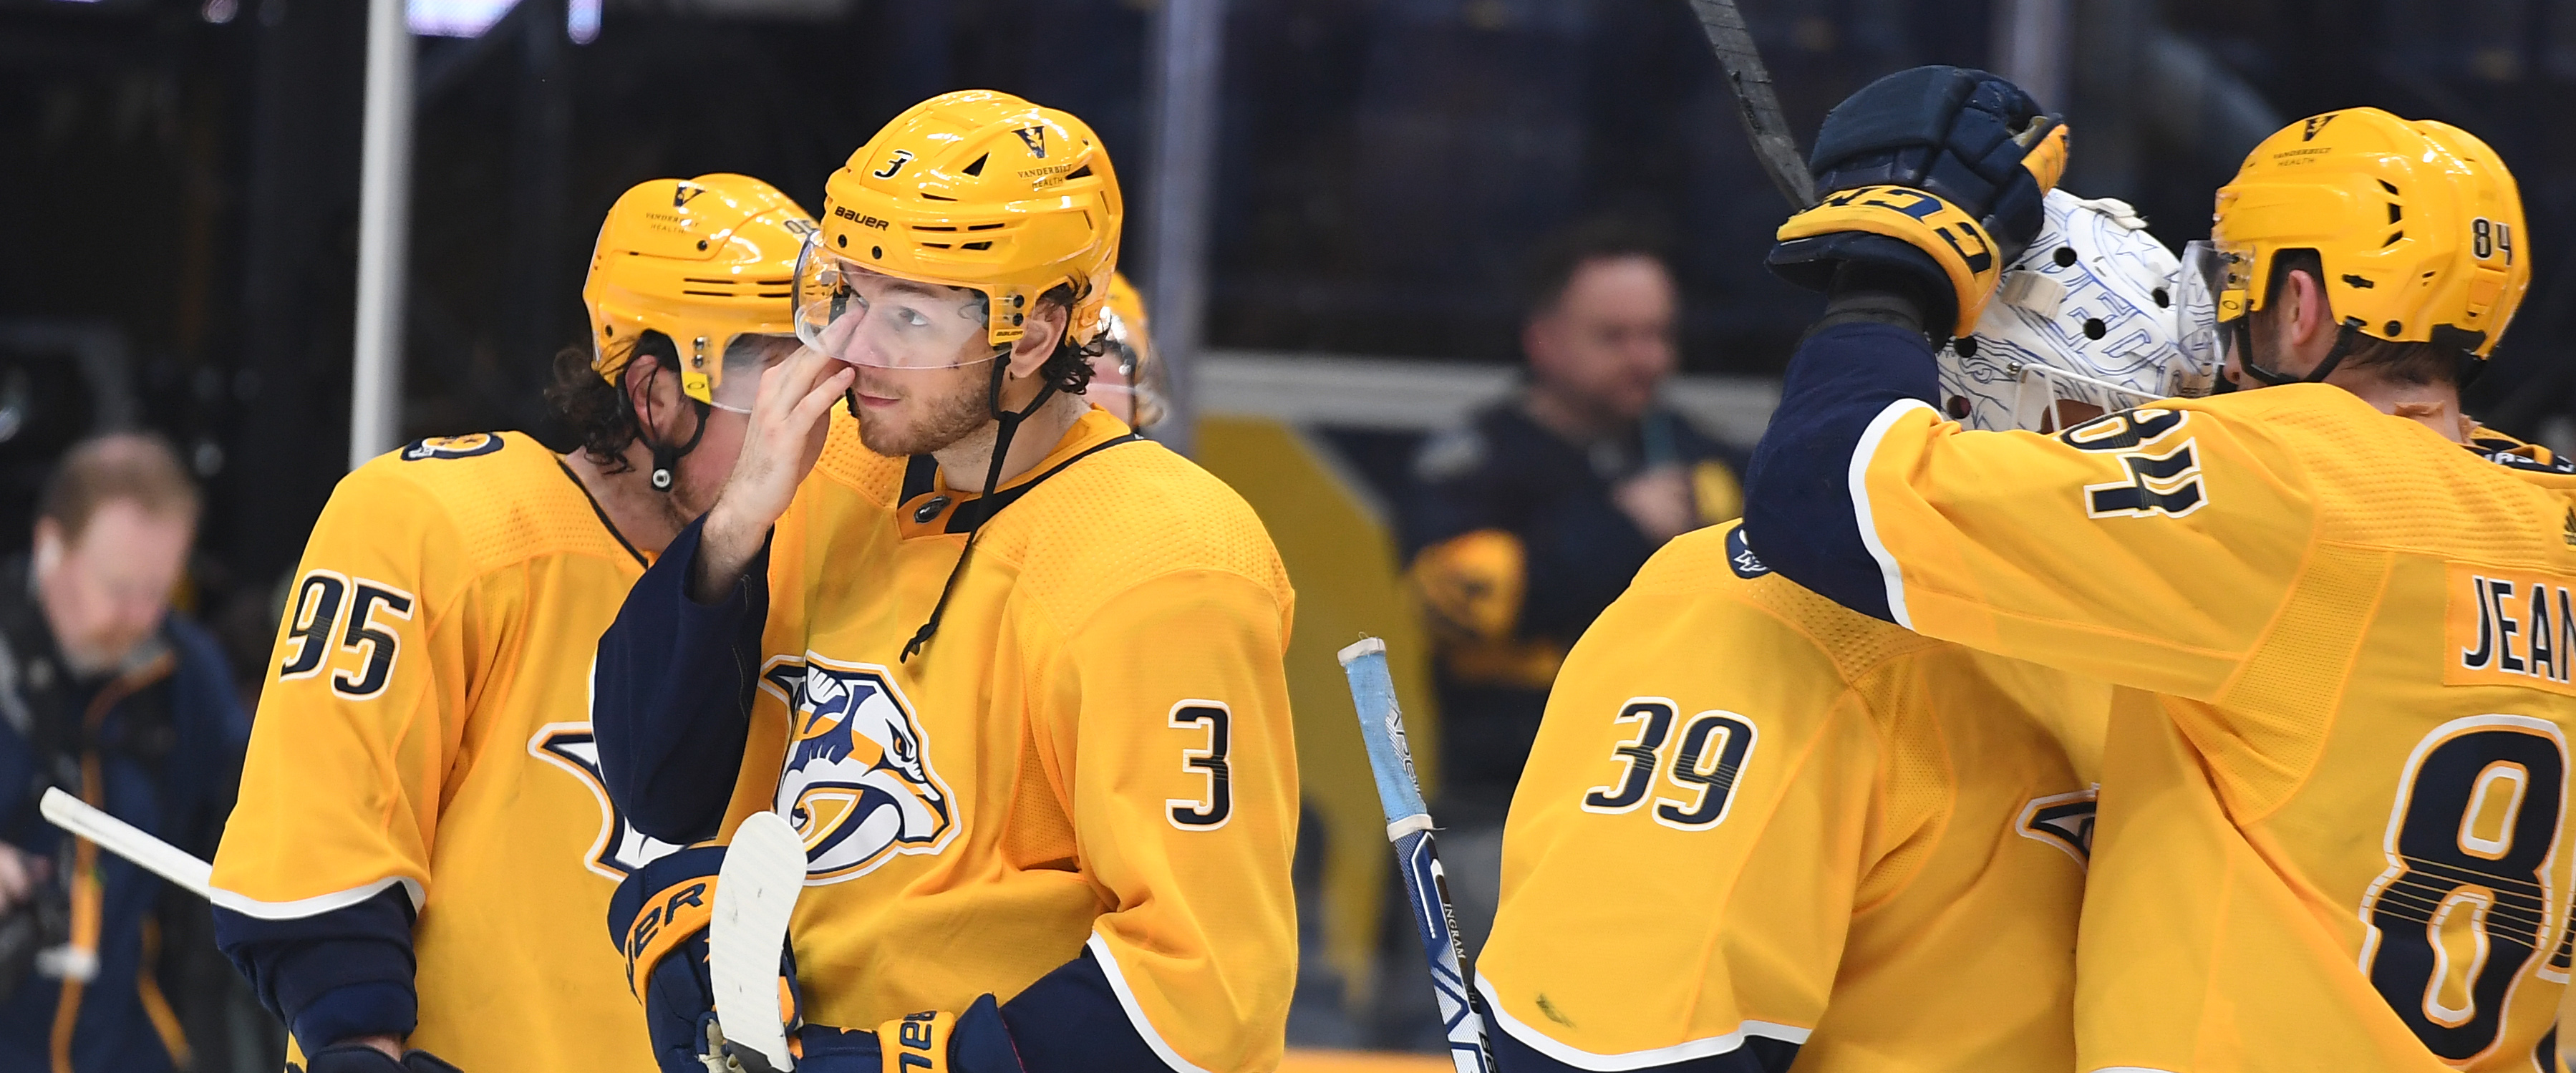 A series of unfortunate events - how the Predators flopped at the end of the season